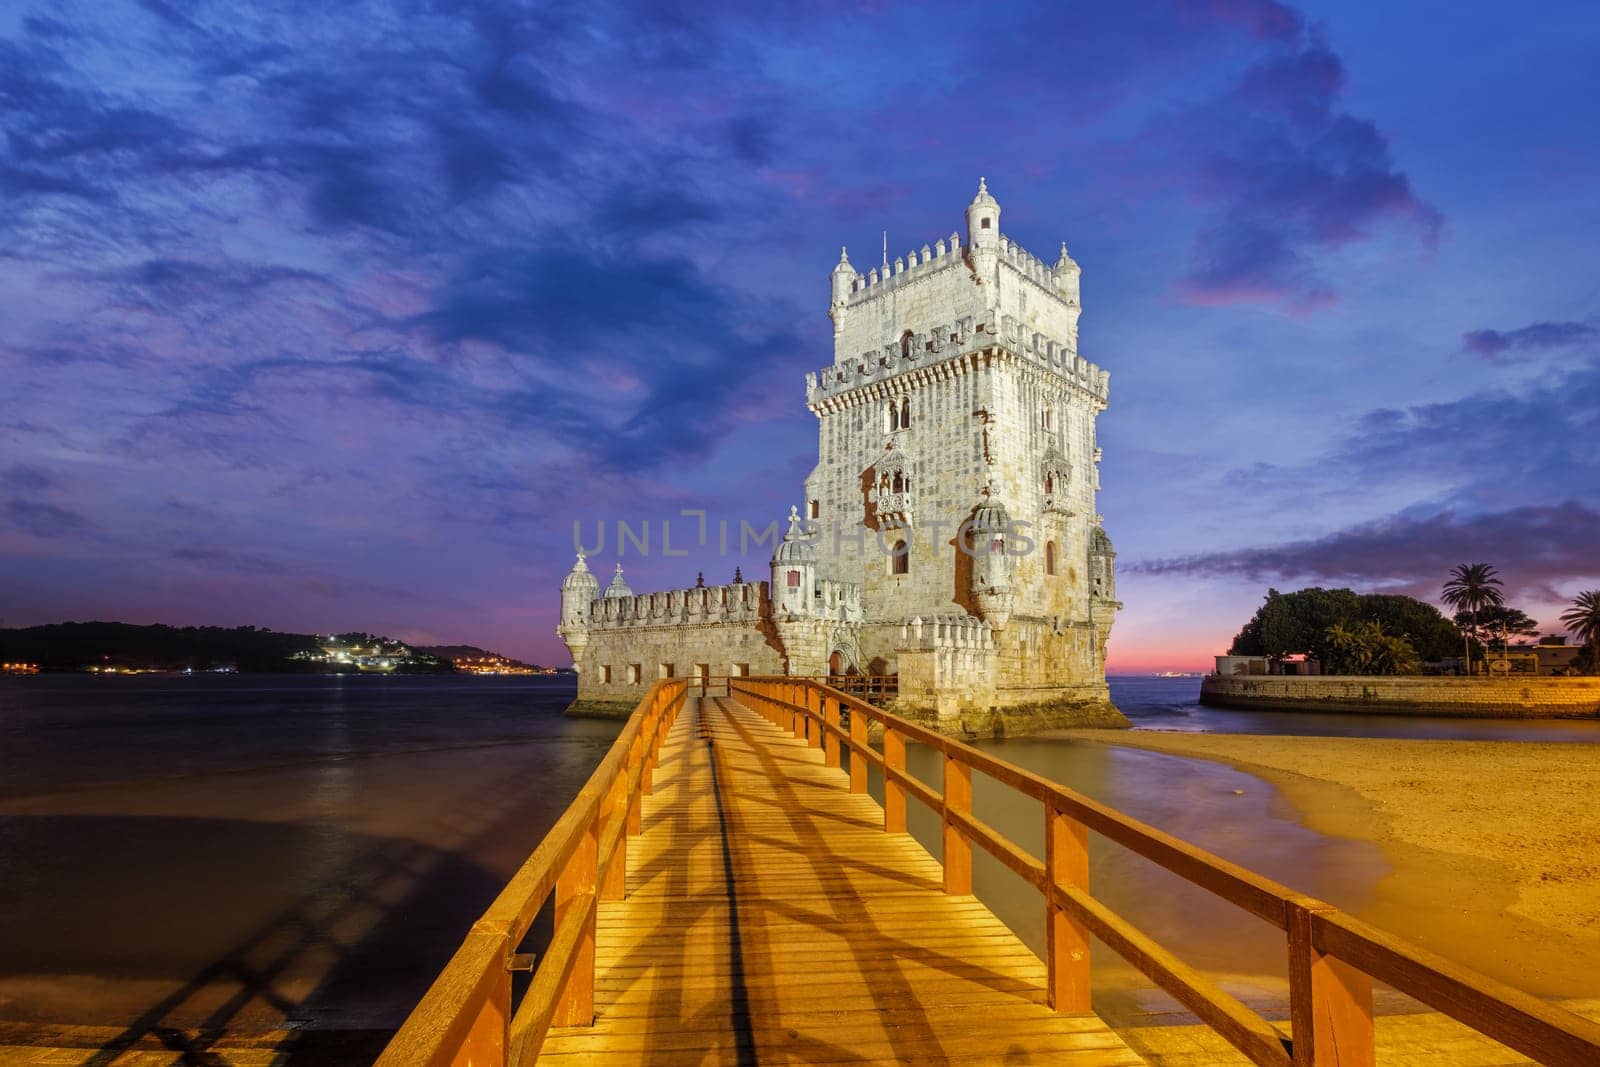 Belem Tower on the bank of the Tagus River in twilight. Lisbon, Portugal by dimol